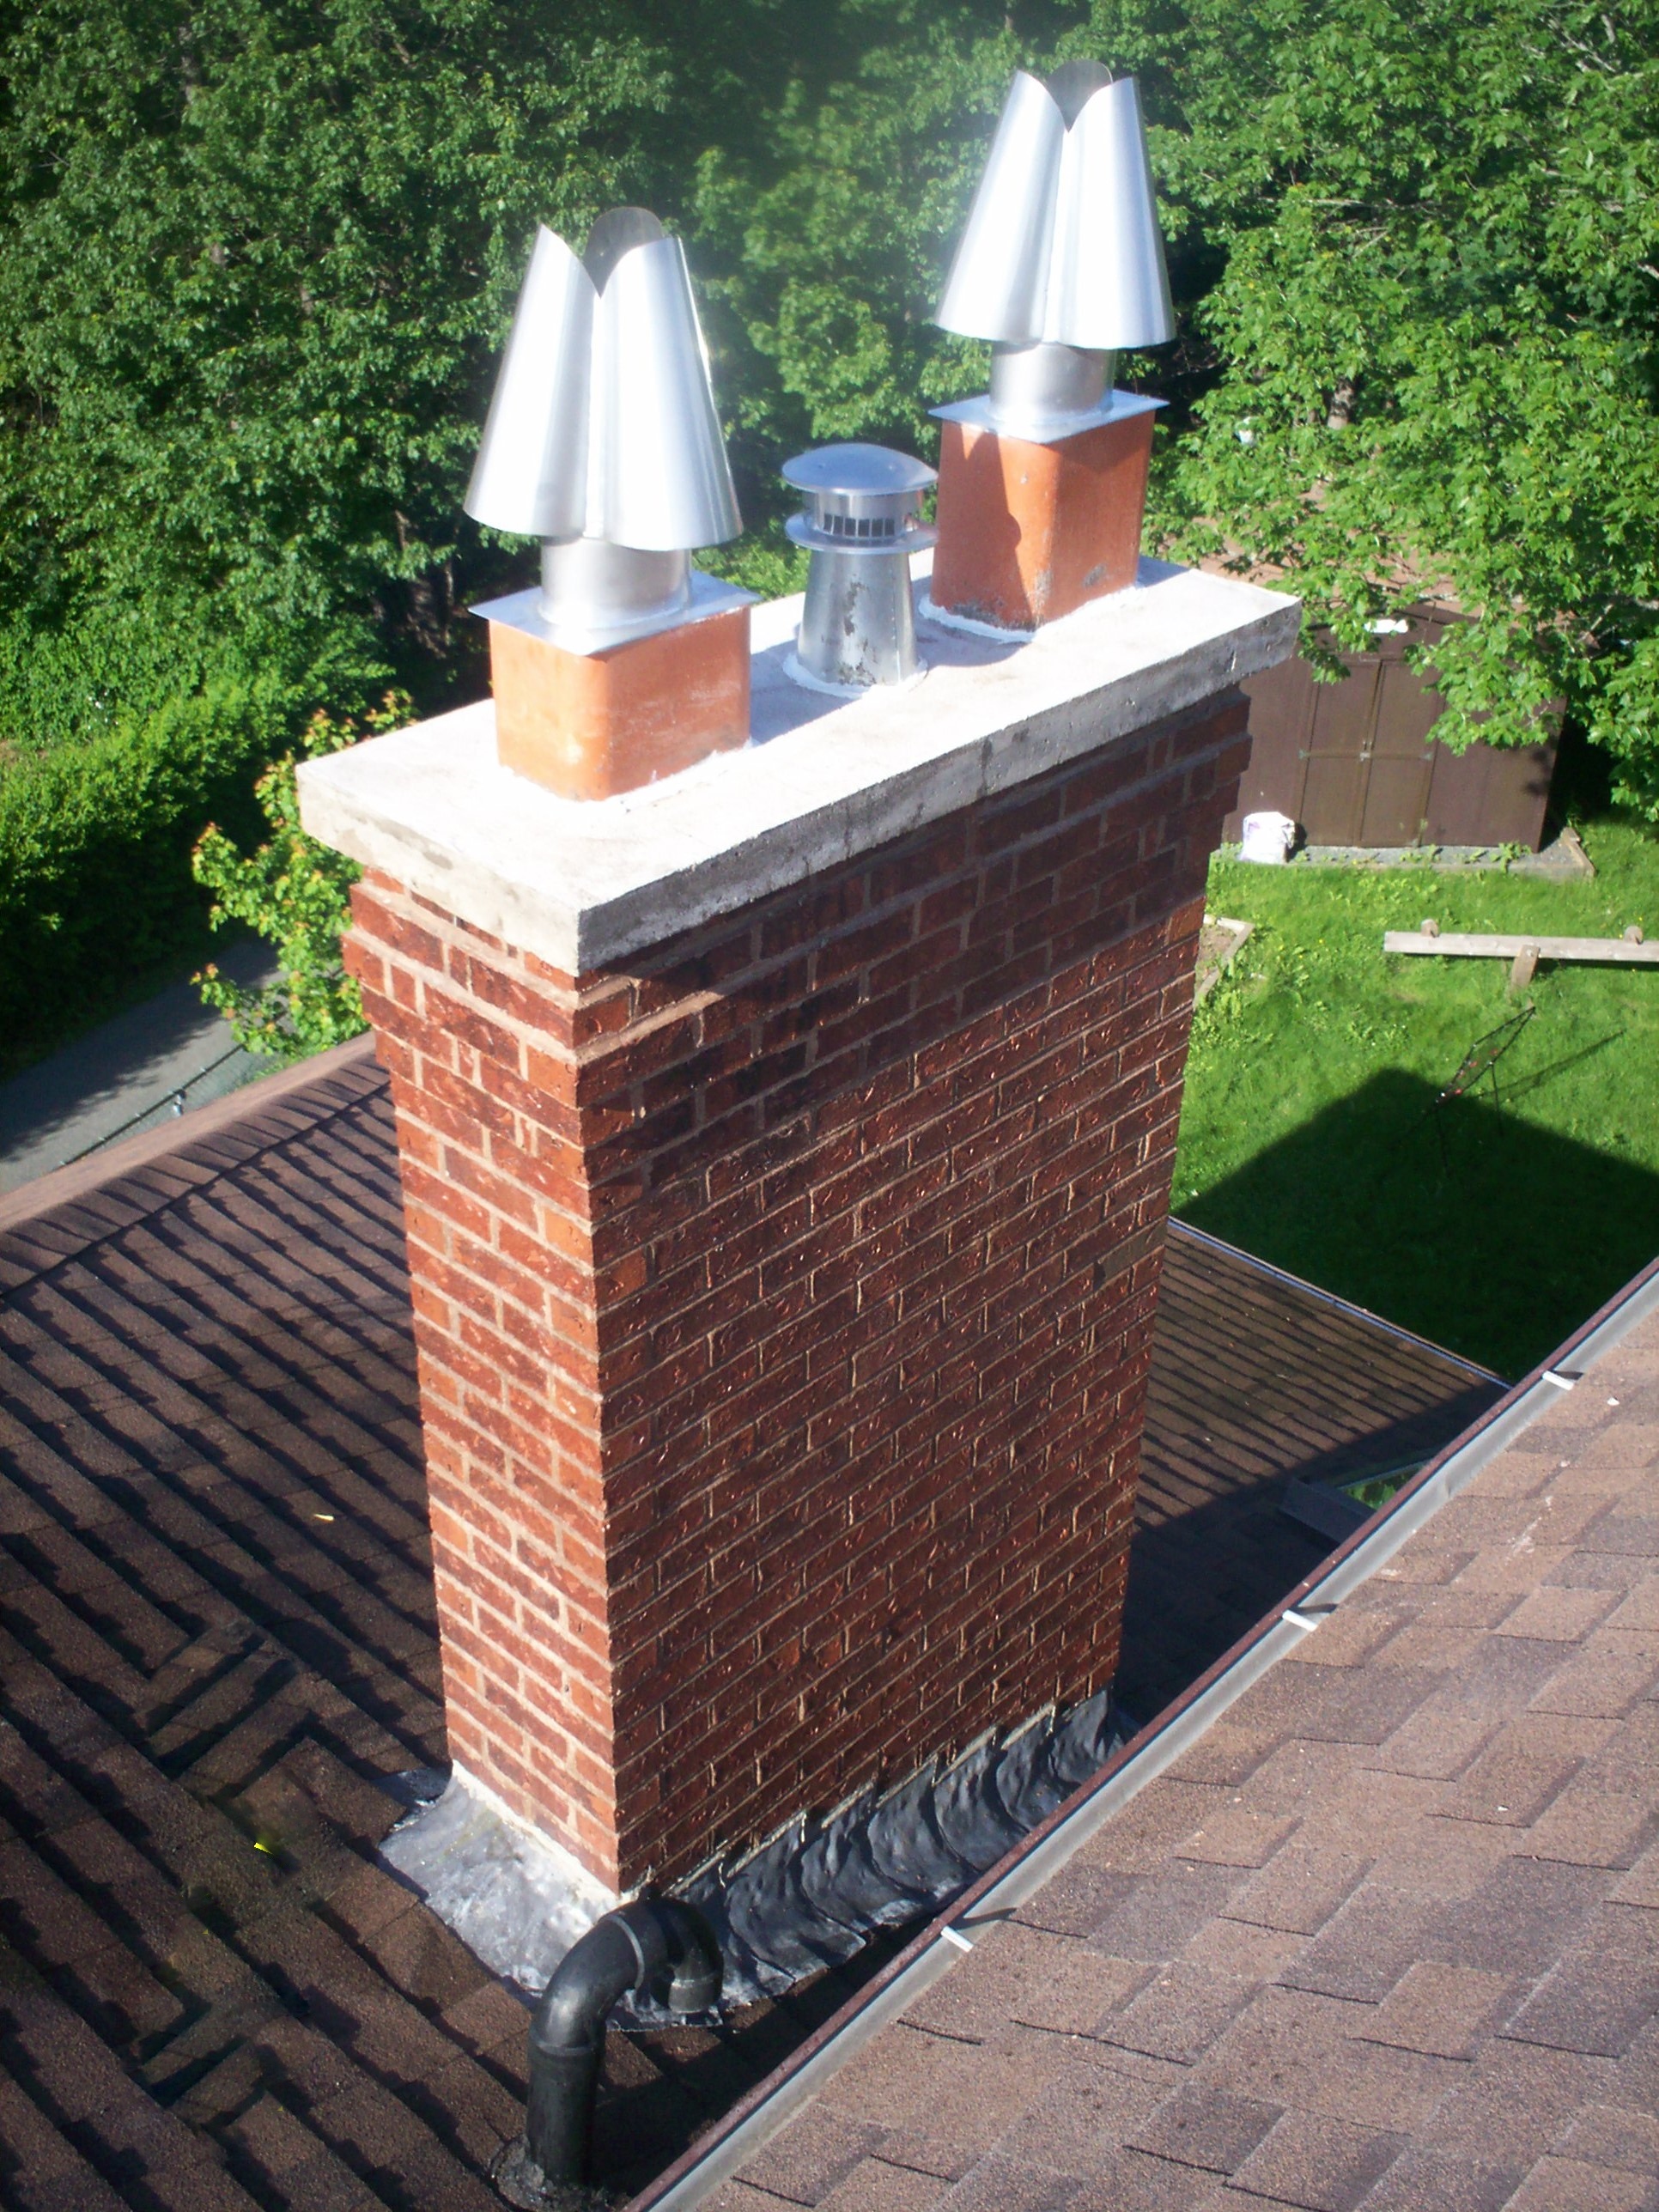 image of chimney-chimney repair services completed in Halifax-Dartmouth Regional Municipality, NS by Pro Chimney Services based in Halifax, NS servicing all of the Halifax-Dartmouth Regional Municipality, Bedford, Sackville, Mount Uniacke, Windsor, Hantsport , Wolfville, Kentville, Chester, Mahone Bay, Lunenburg, Bridgewater, Liverpool, Fall River, Wellington, Enfield, Elmsdale, Brookfield, Truro, Musquodoboit Harbour & surrounding areas.